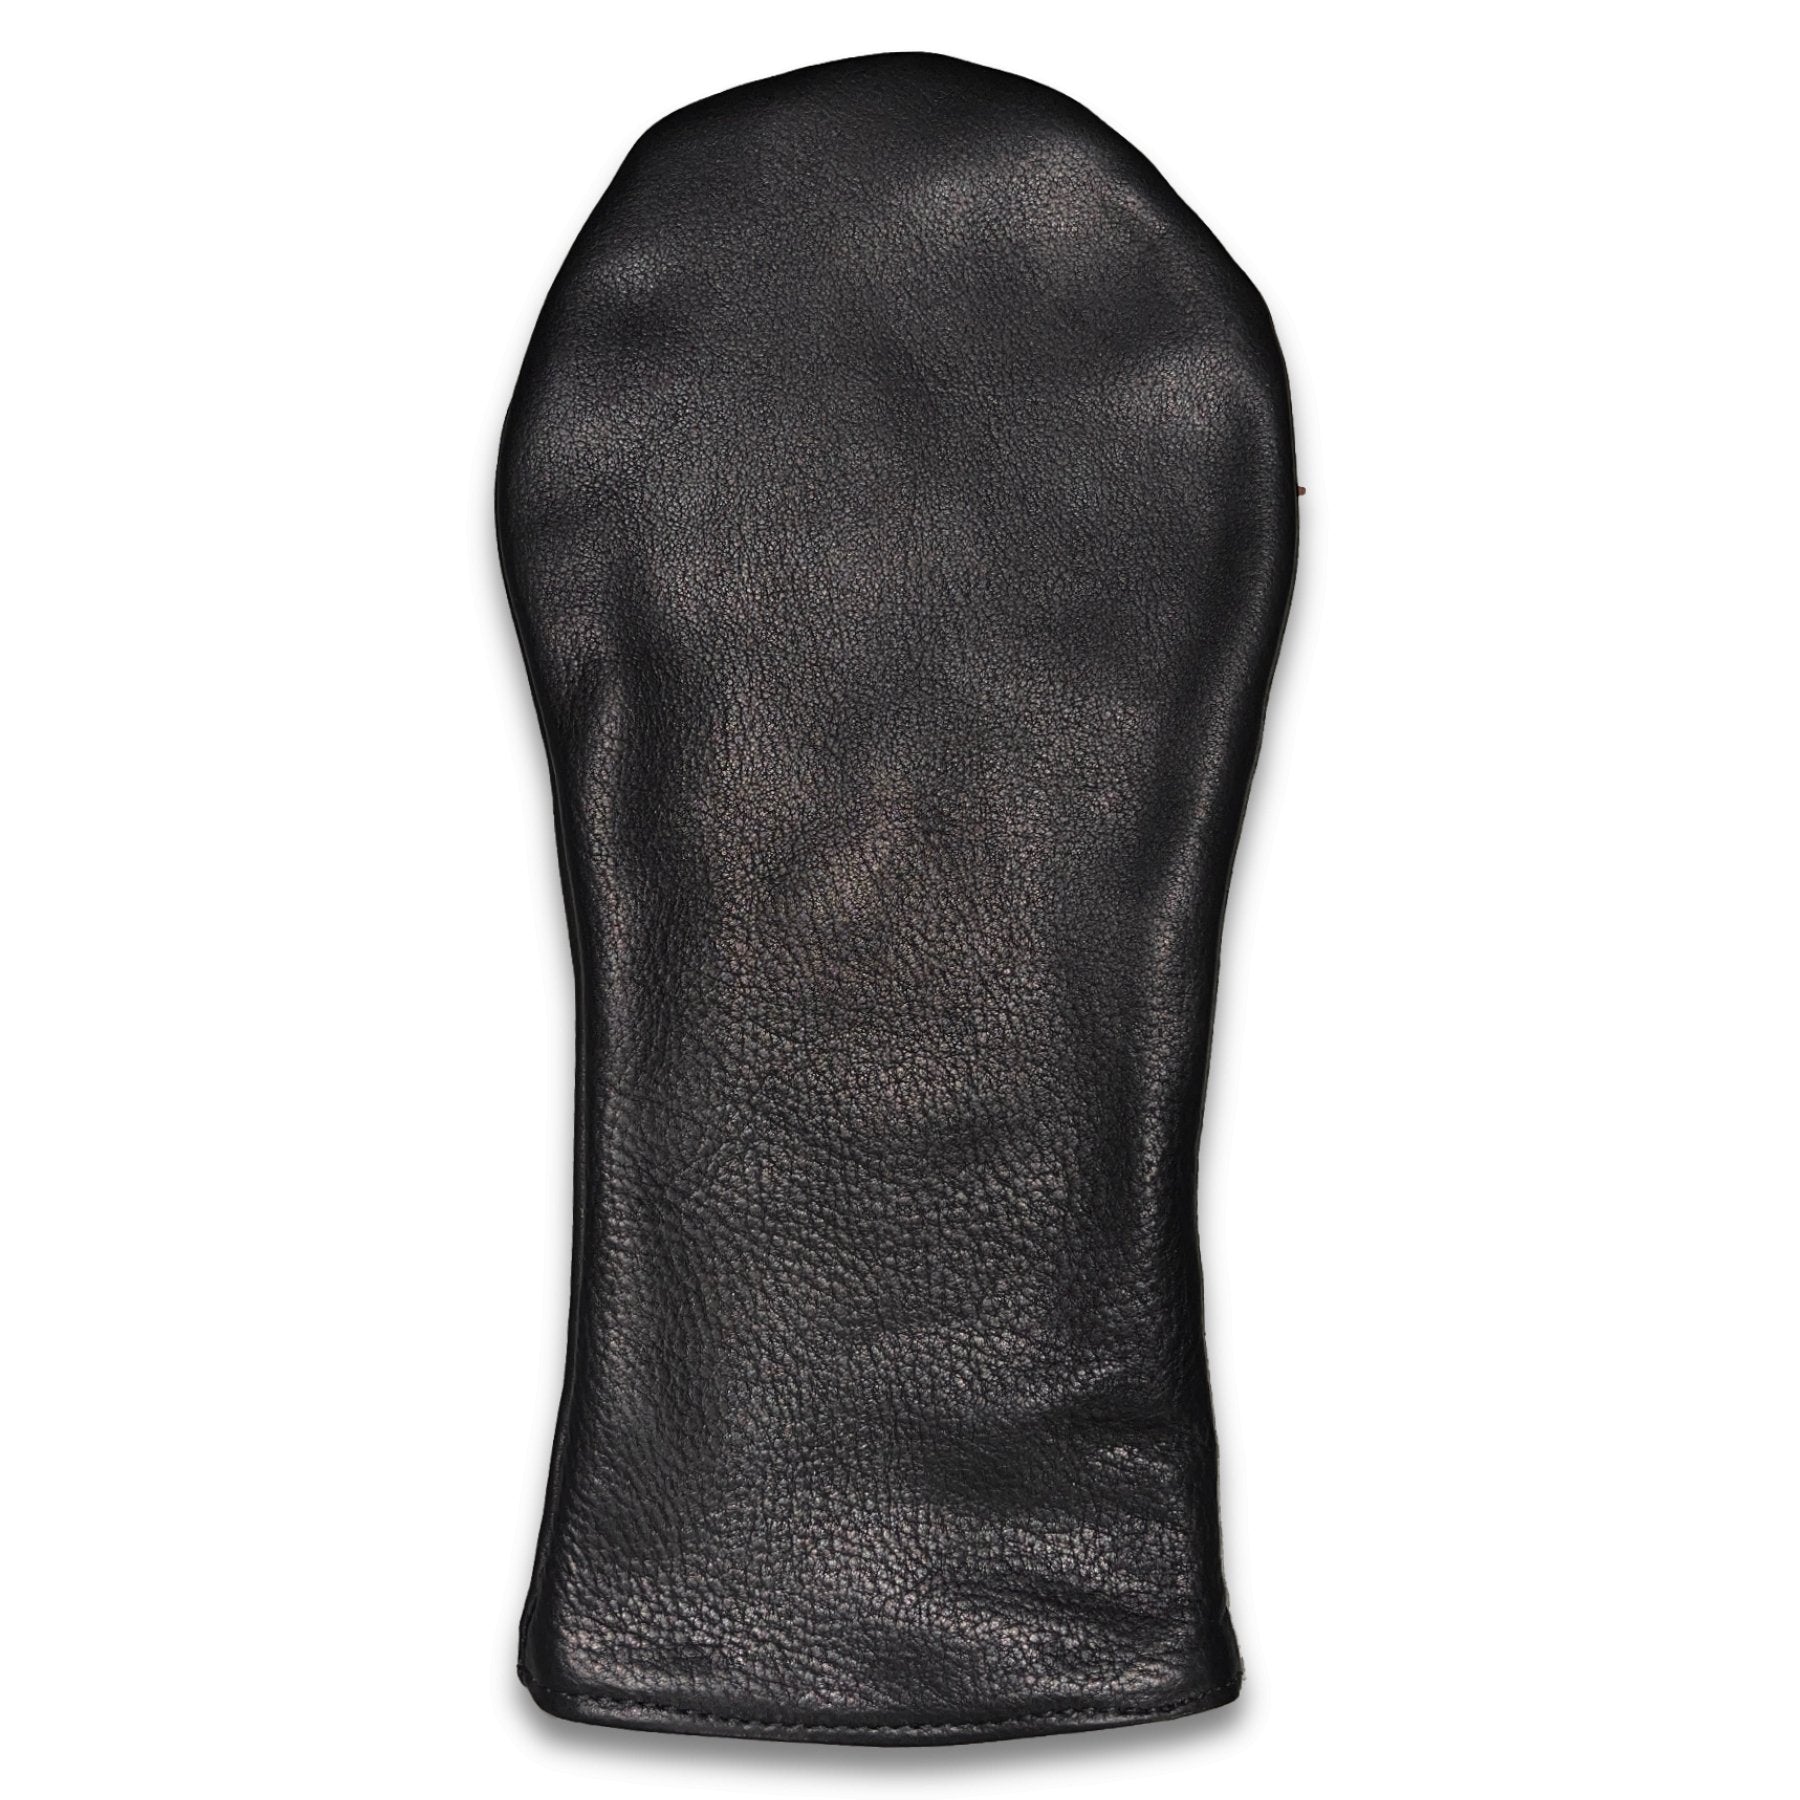 Ranger Leather Head Cover - Black - Driver -